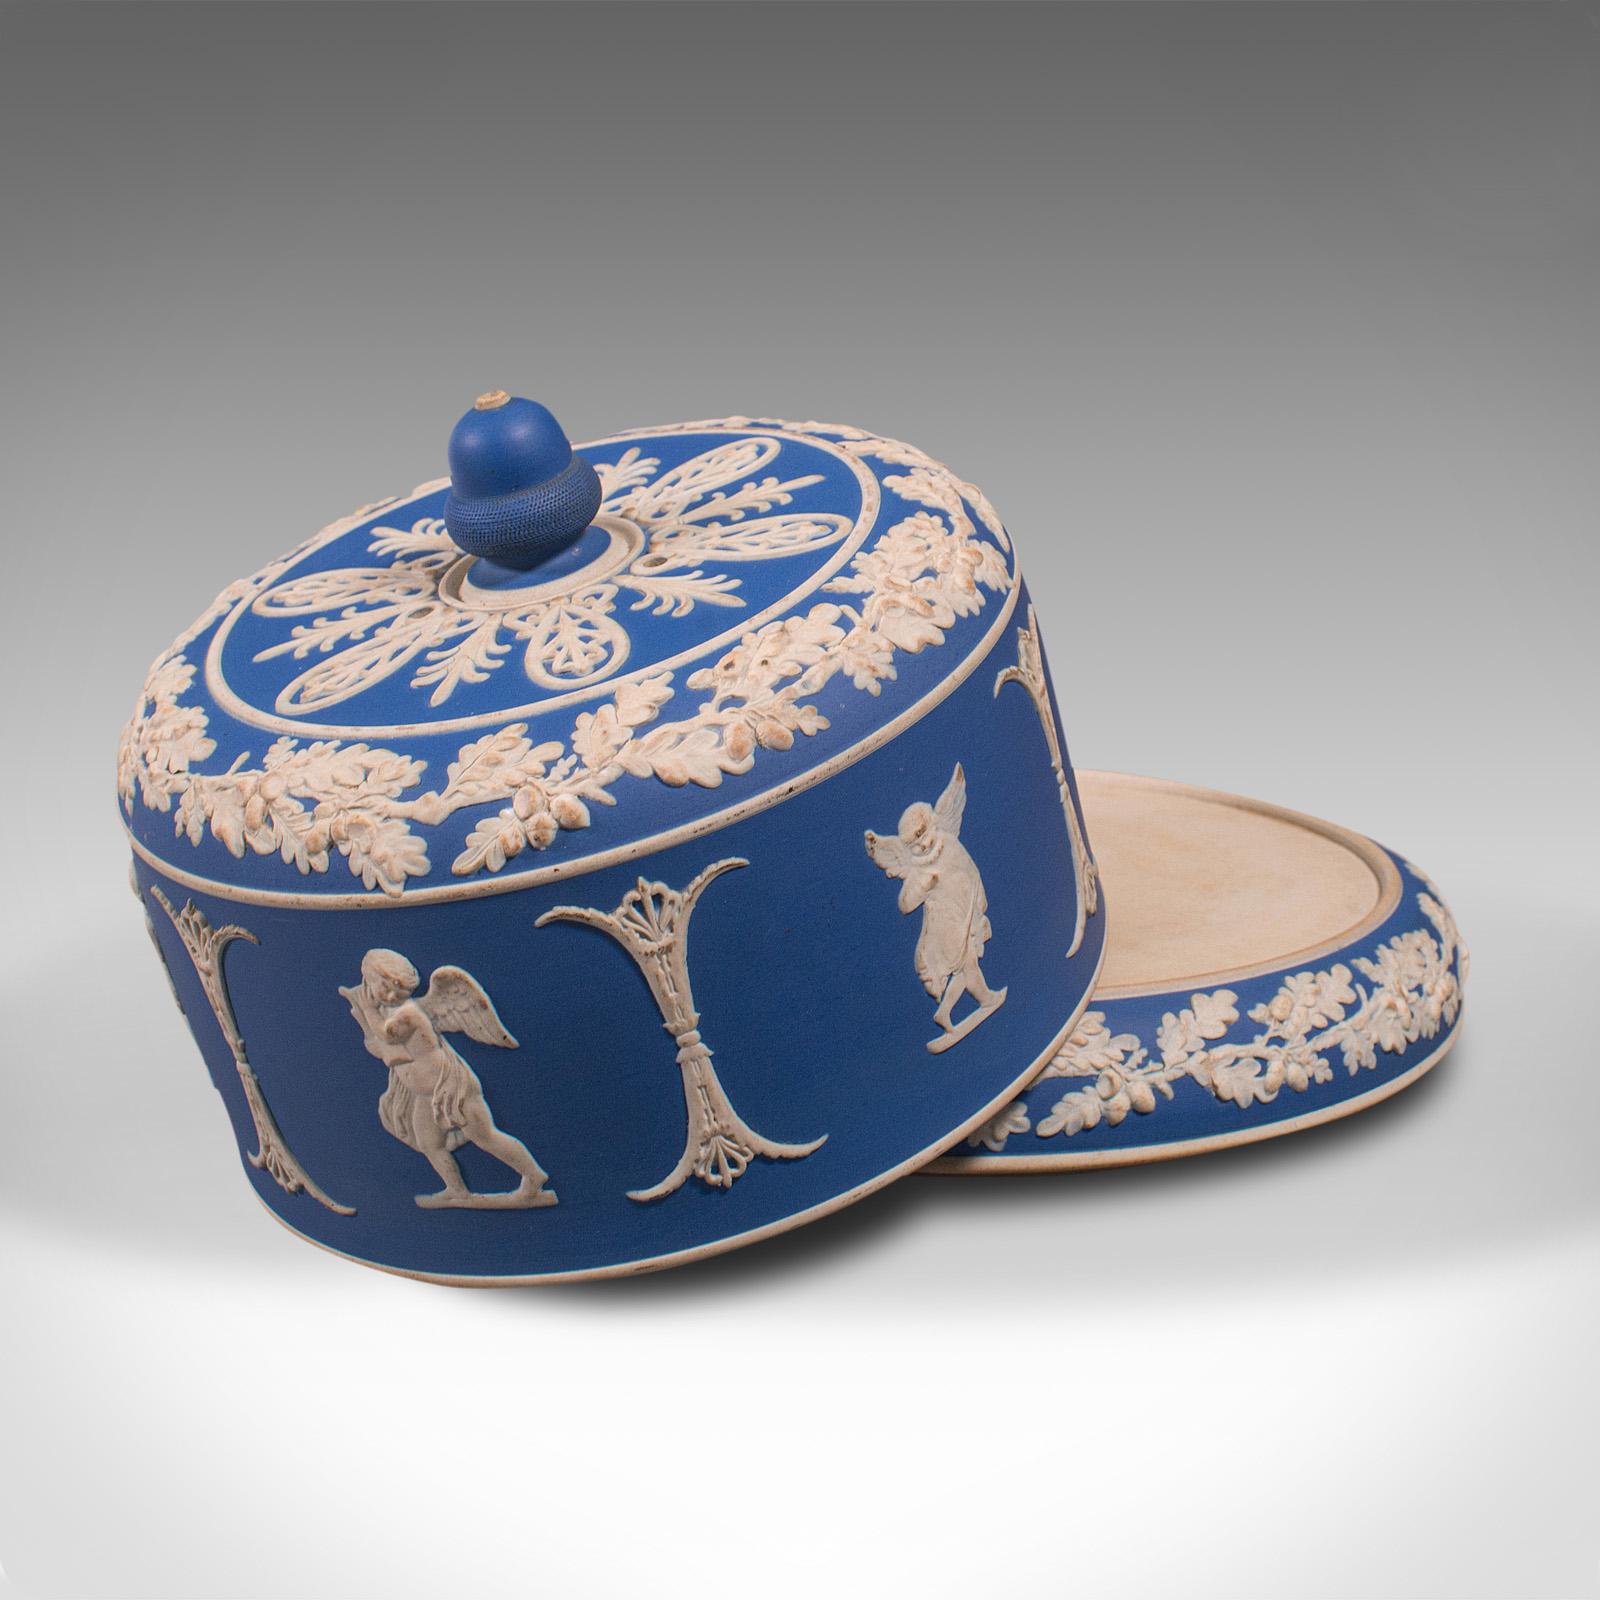 This is an antique decorative cheese keeper. An English, Jasperware serving dome in the manner of Wedgwood, dating to the early Victorian period, circa 1850.

Alluring cheese keeper with attractive blue palette
Displays a desirable aged patina